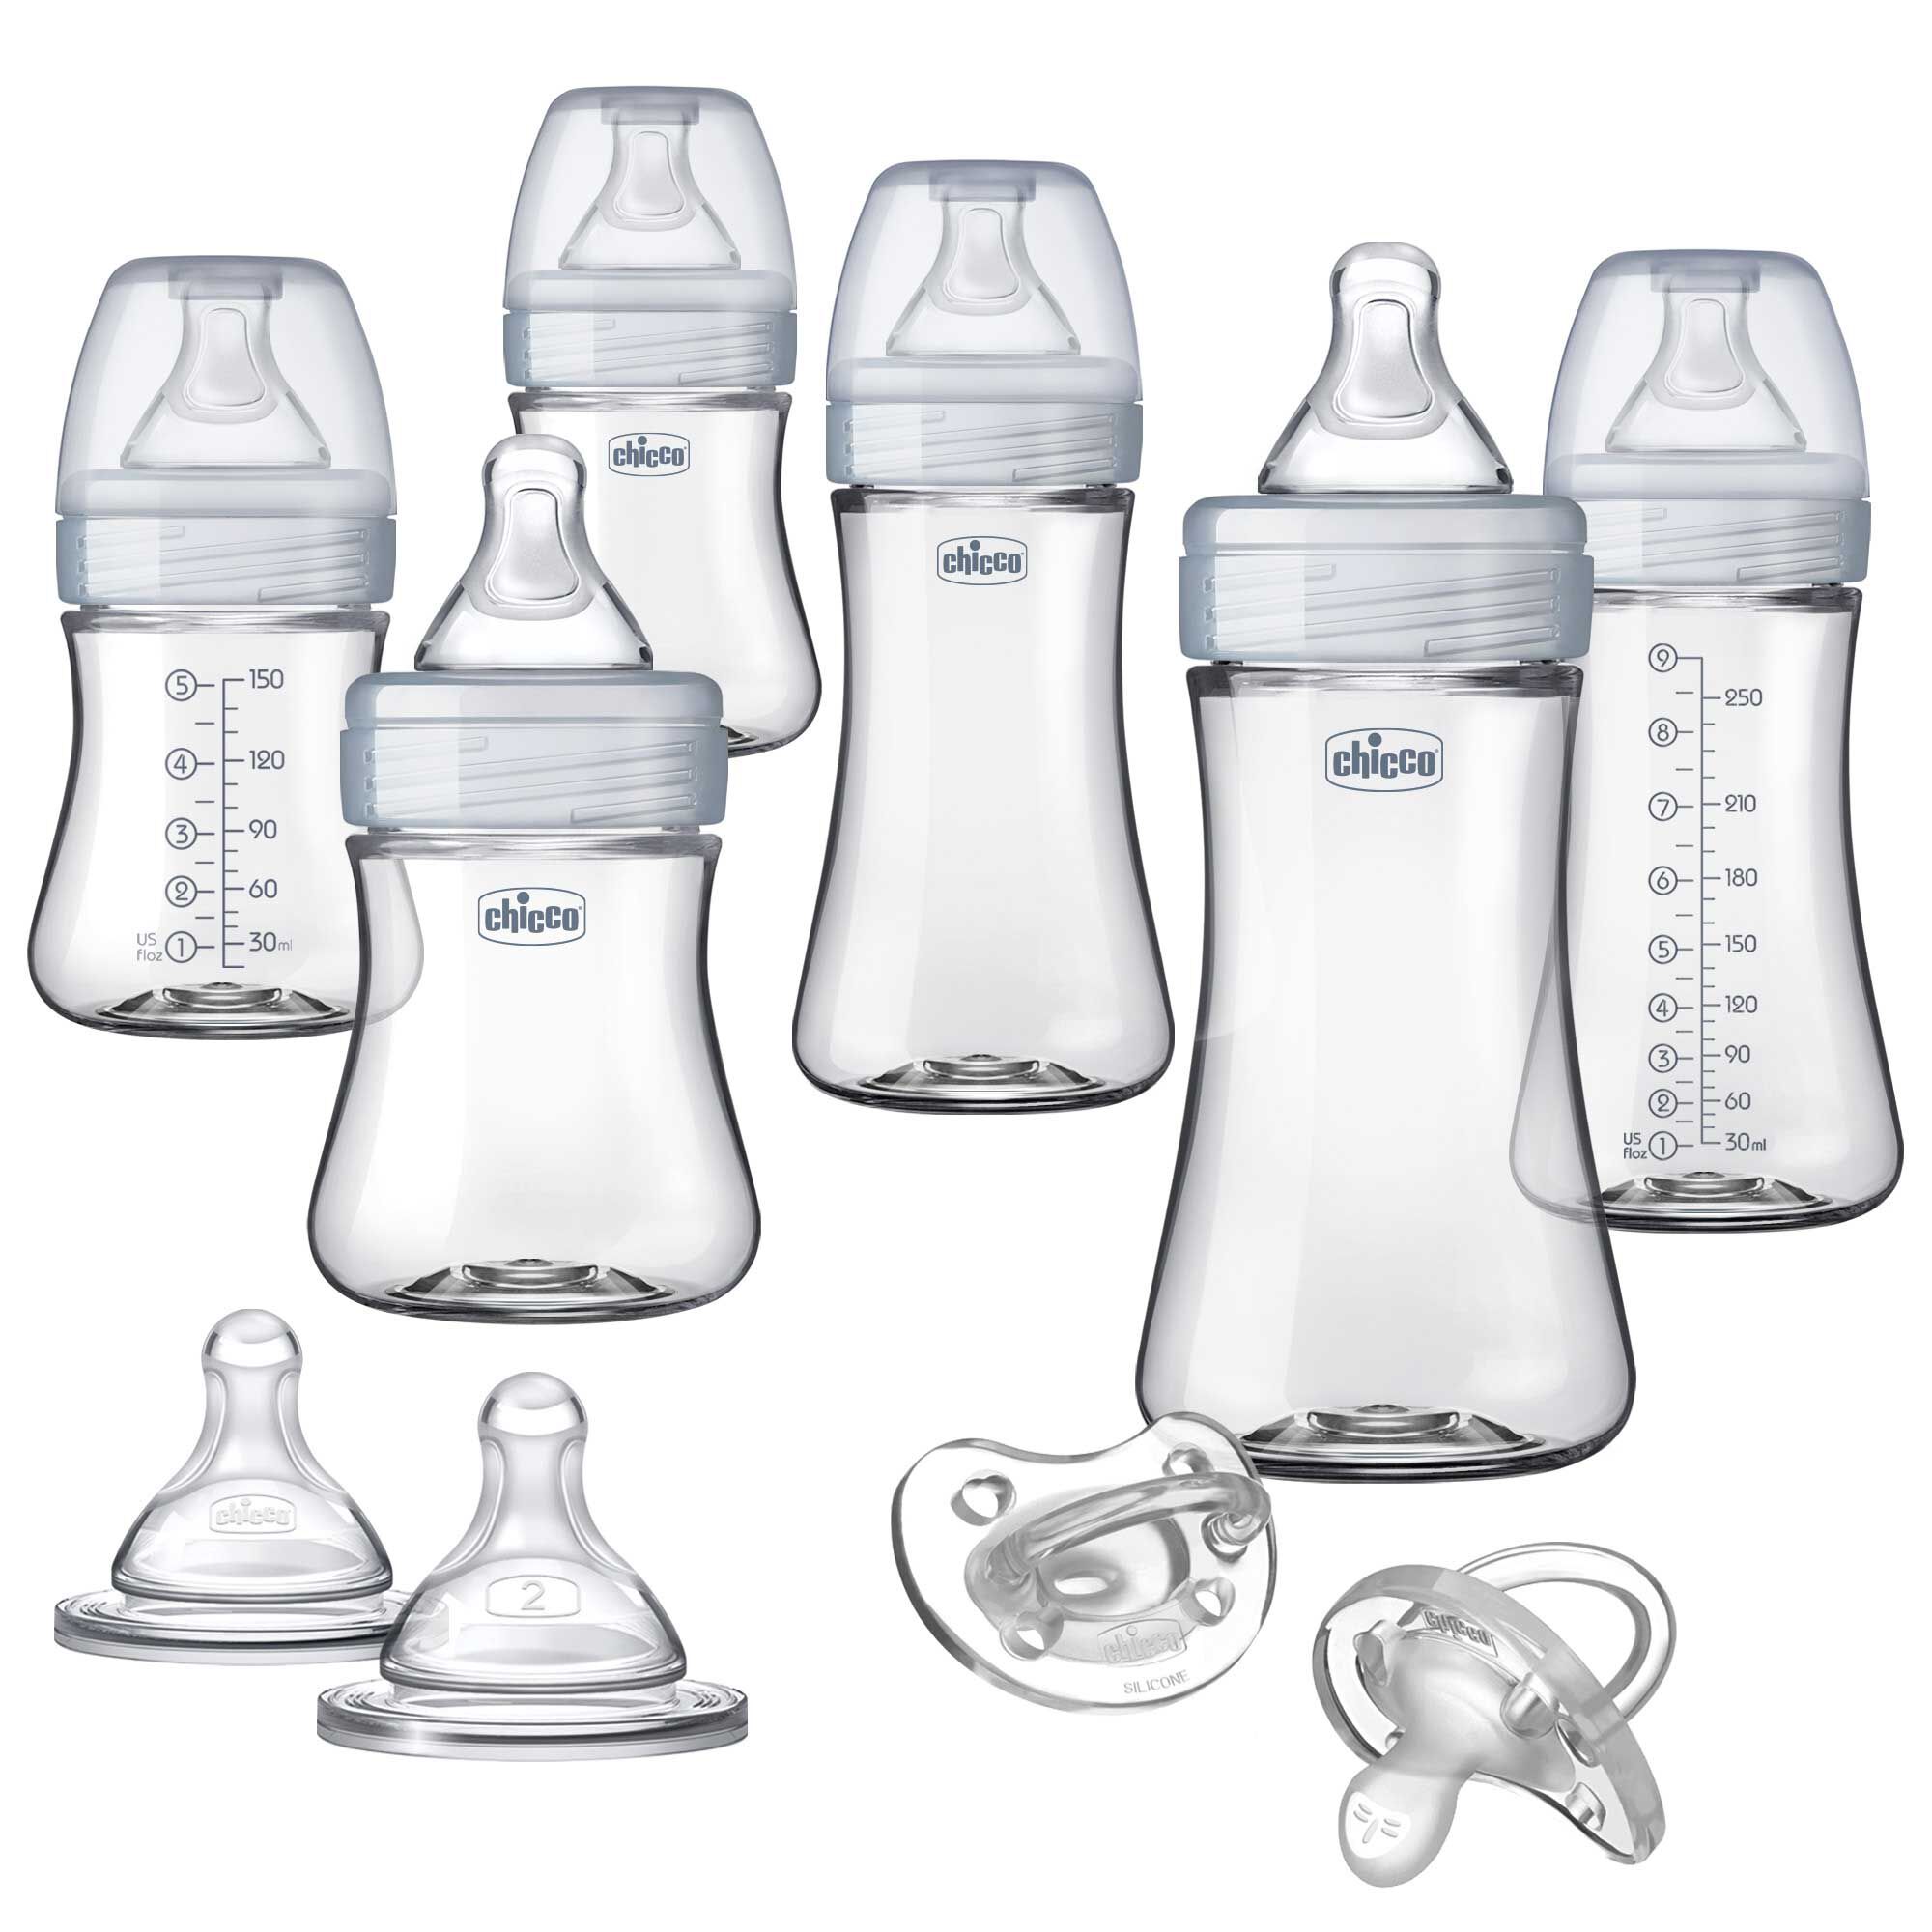 https://www.chiccousa.com/dw/image/v2/AAMT_PRD/on/demandware.static/-/Sites-chicco_catalog/default/dw9e71c606/images/products/feeding/duo-bottle/chicco-duo-bottle-deluxe-gift-set.jpg?sw=2000&sh=2000&sm=fit